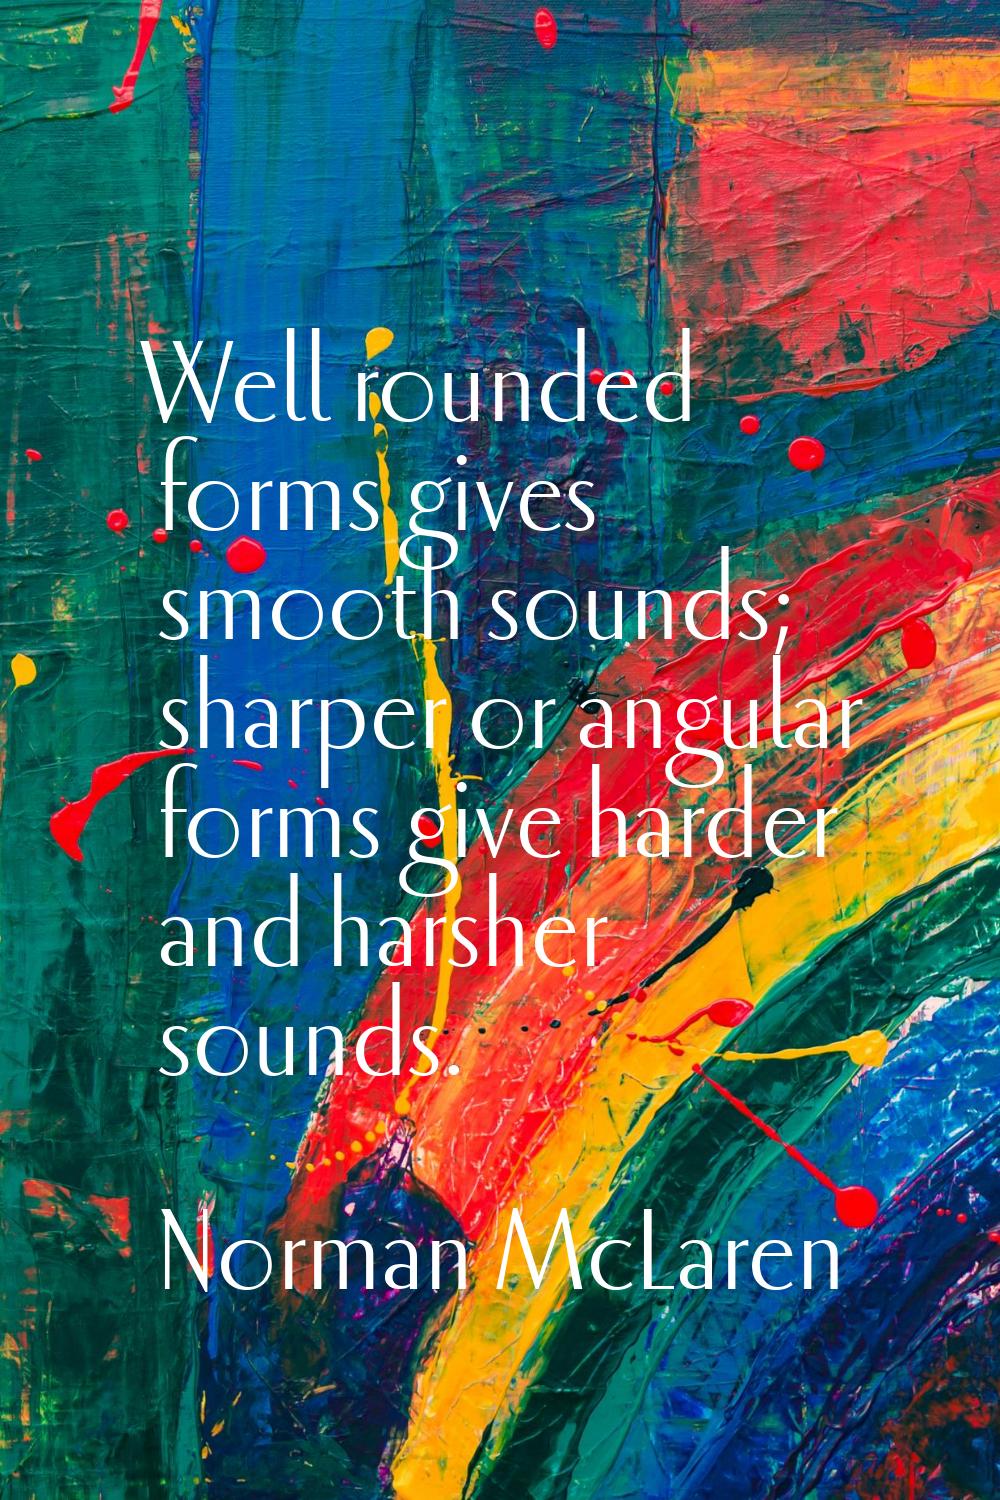 Well rounded forms gives smooth sounds; sharper or angular forms give harder and harsher sounds.